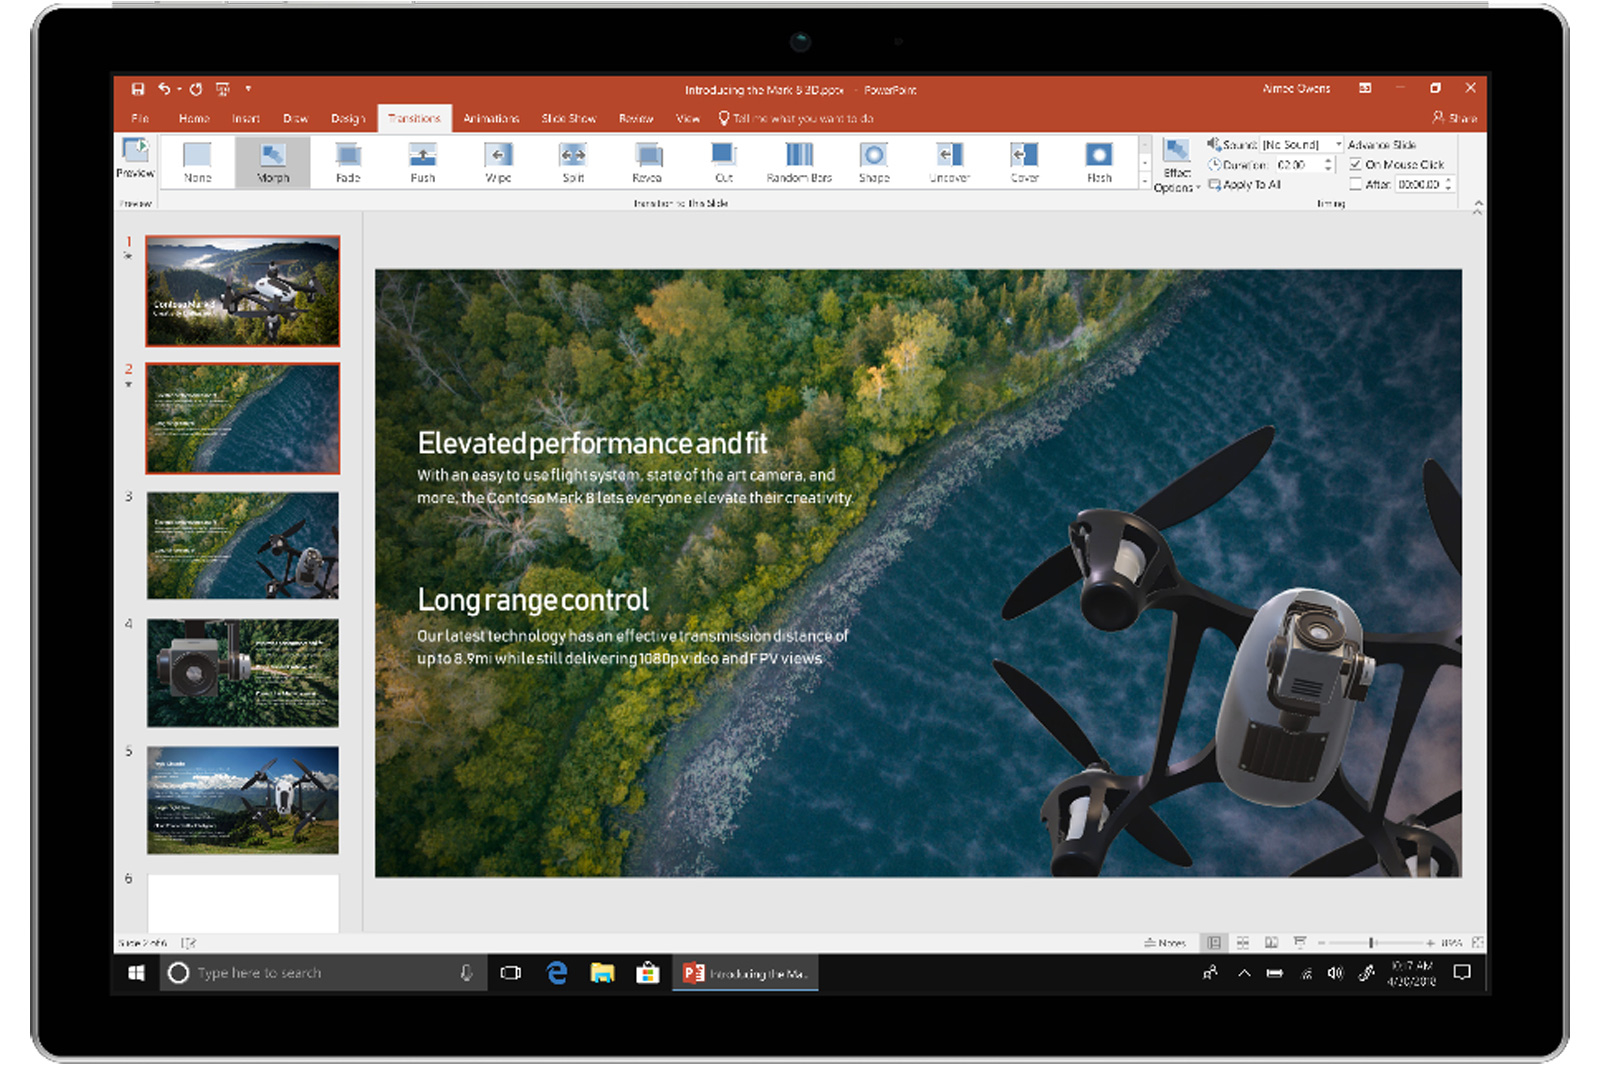 Microsoft office for mac free trial